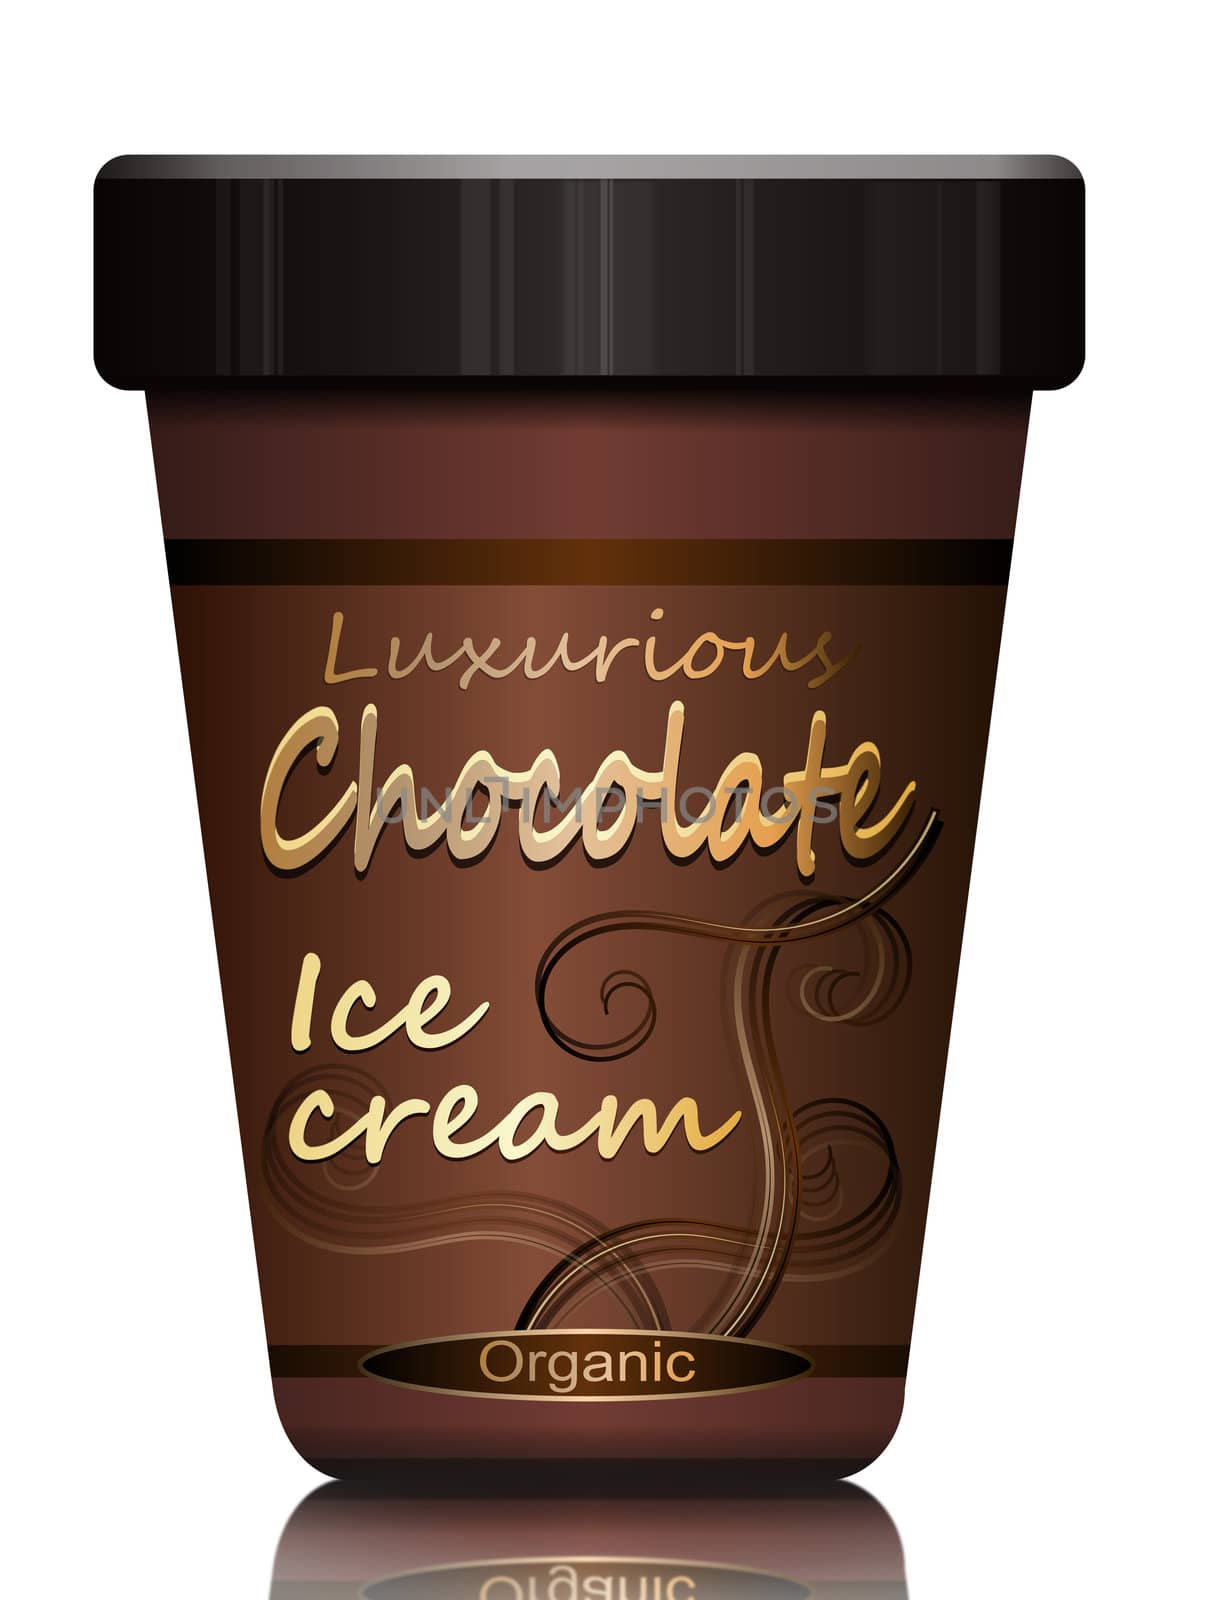 Illustration depicting a single chocolate ice cream container arranged over white.